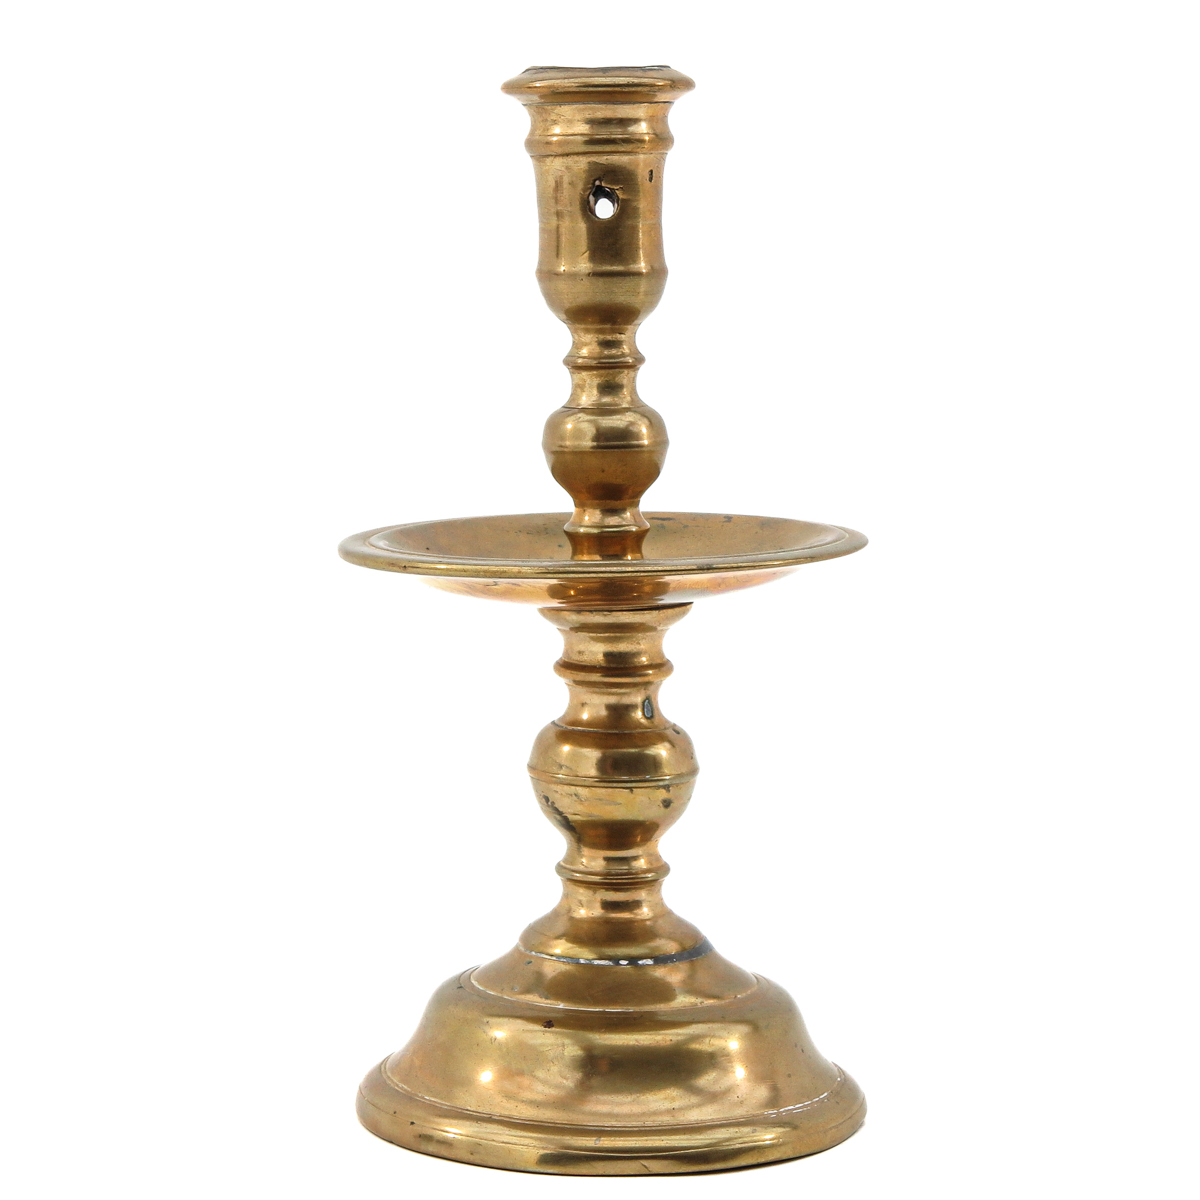 A 17th Century Bronze Candlestick - Image 2 of 8